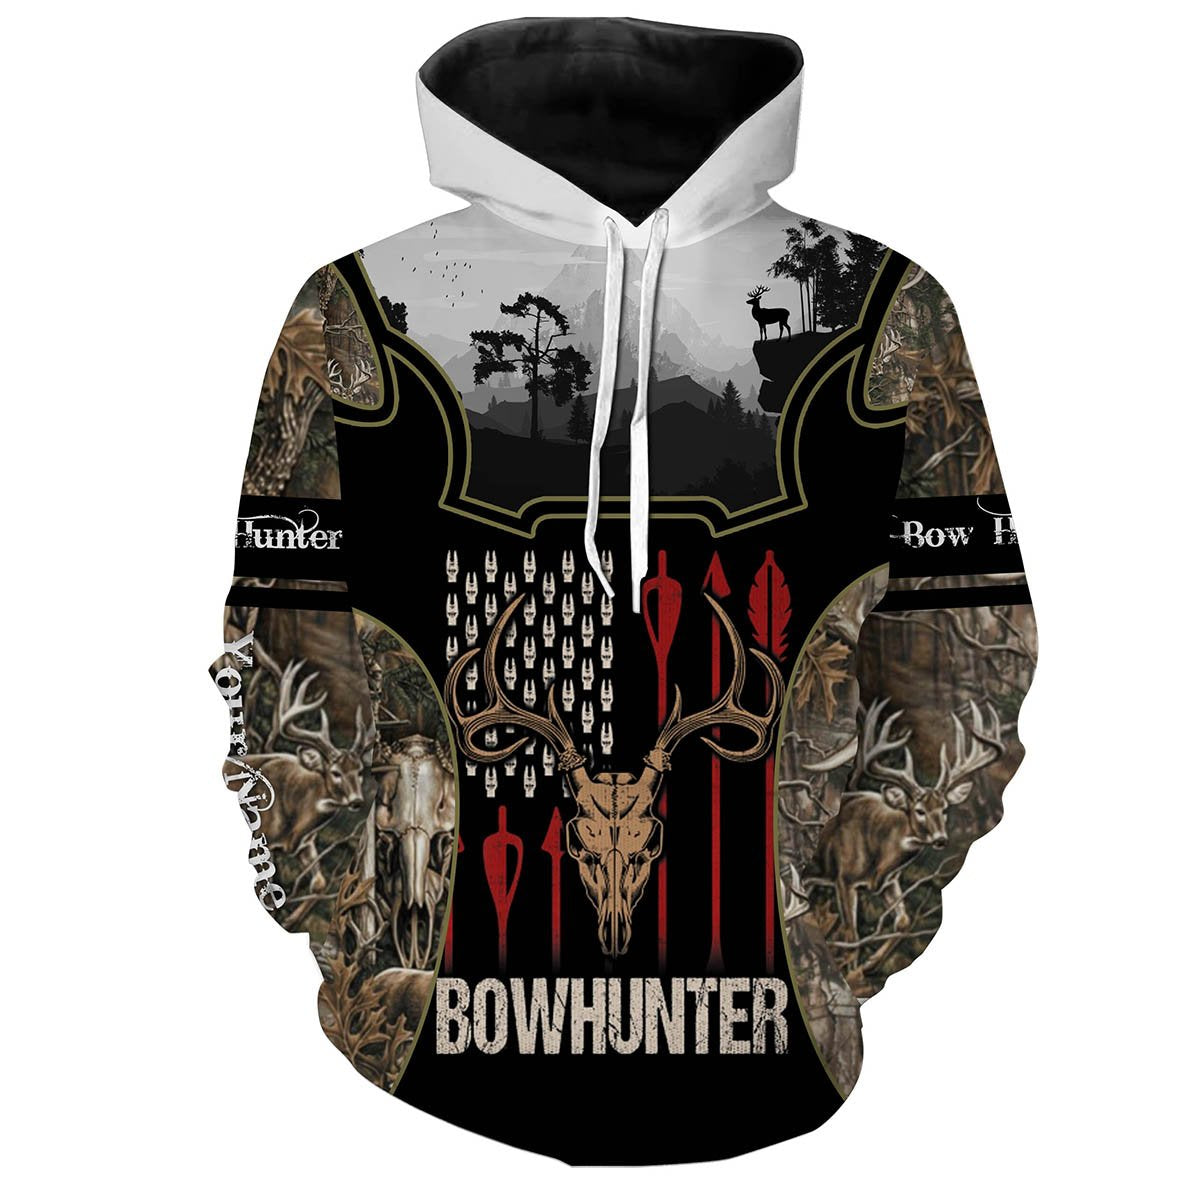 Love Elk Hunter Bow Hunting Customize Name 3D All Over Printed Hunting Shirt Personalized Gift For Hunters